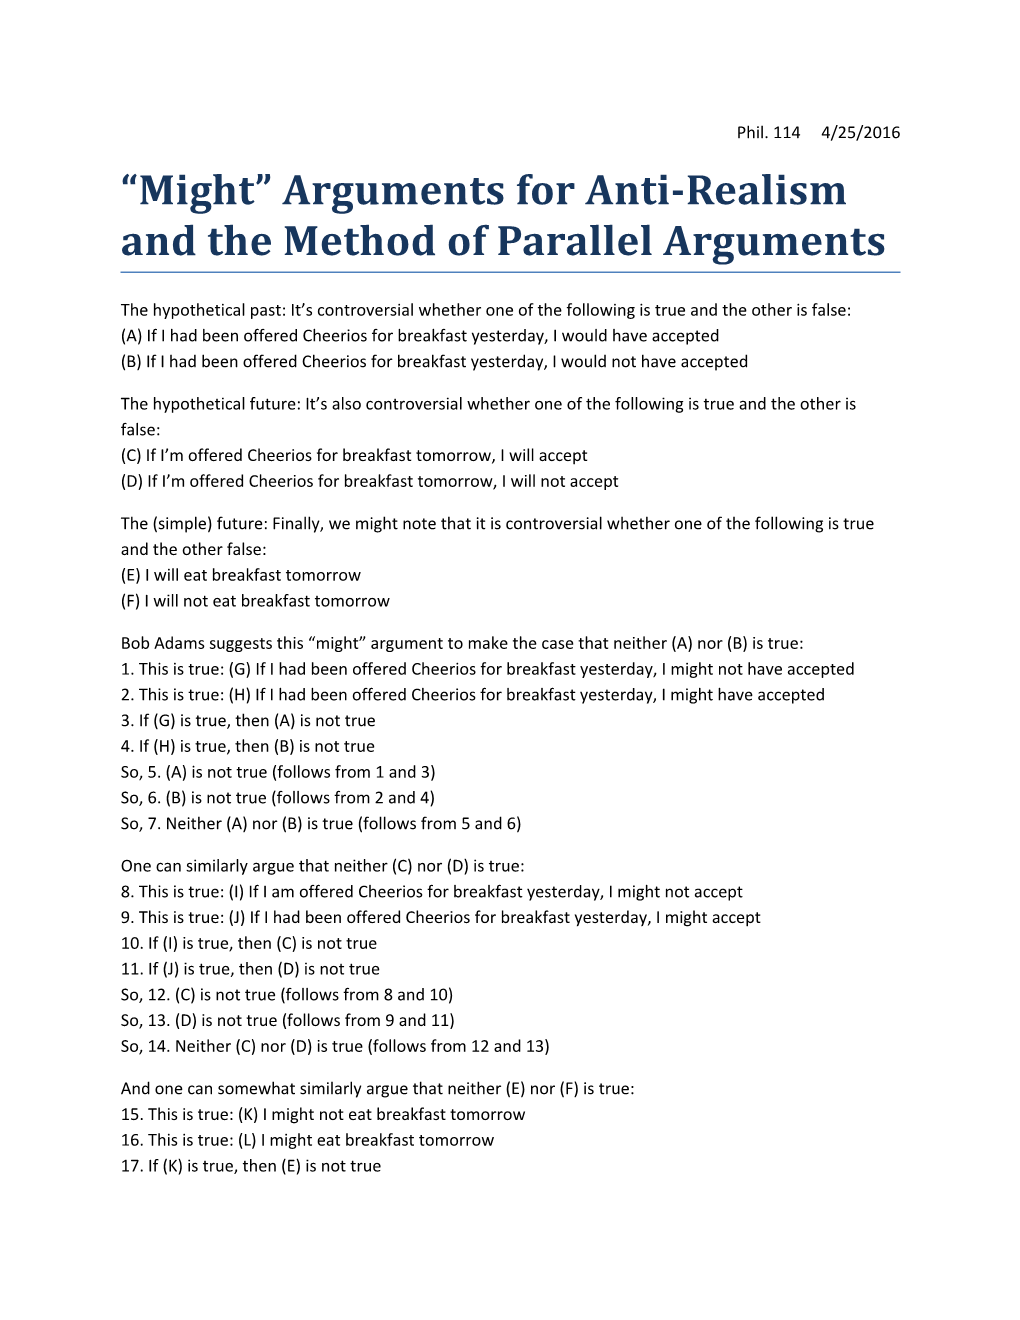 Might Arguments for Anti-Realism and the Method of Parallel Arguments